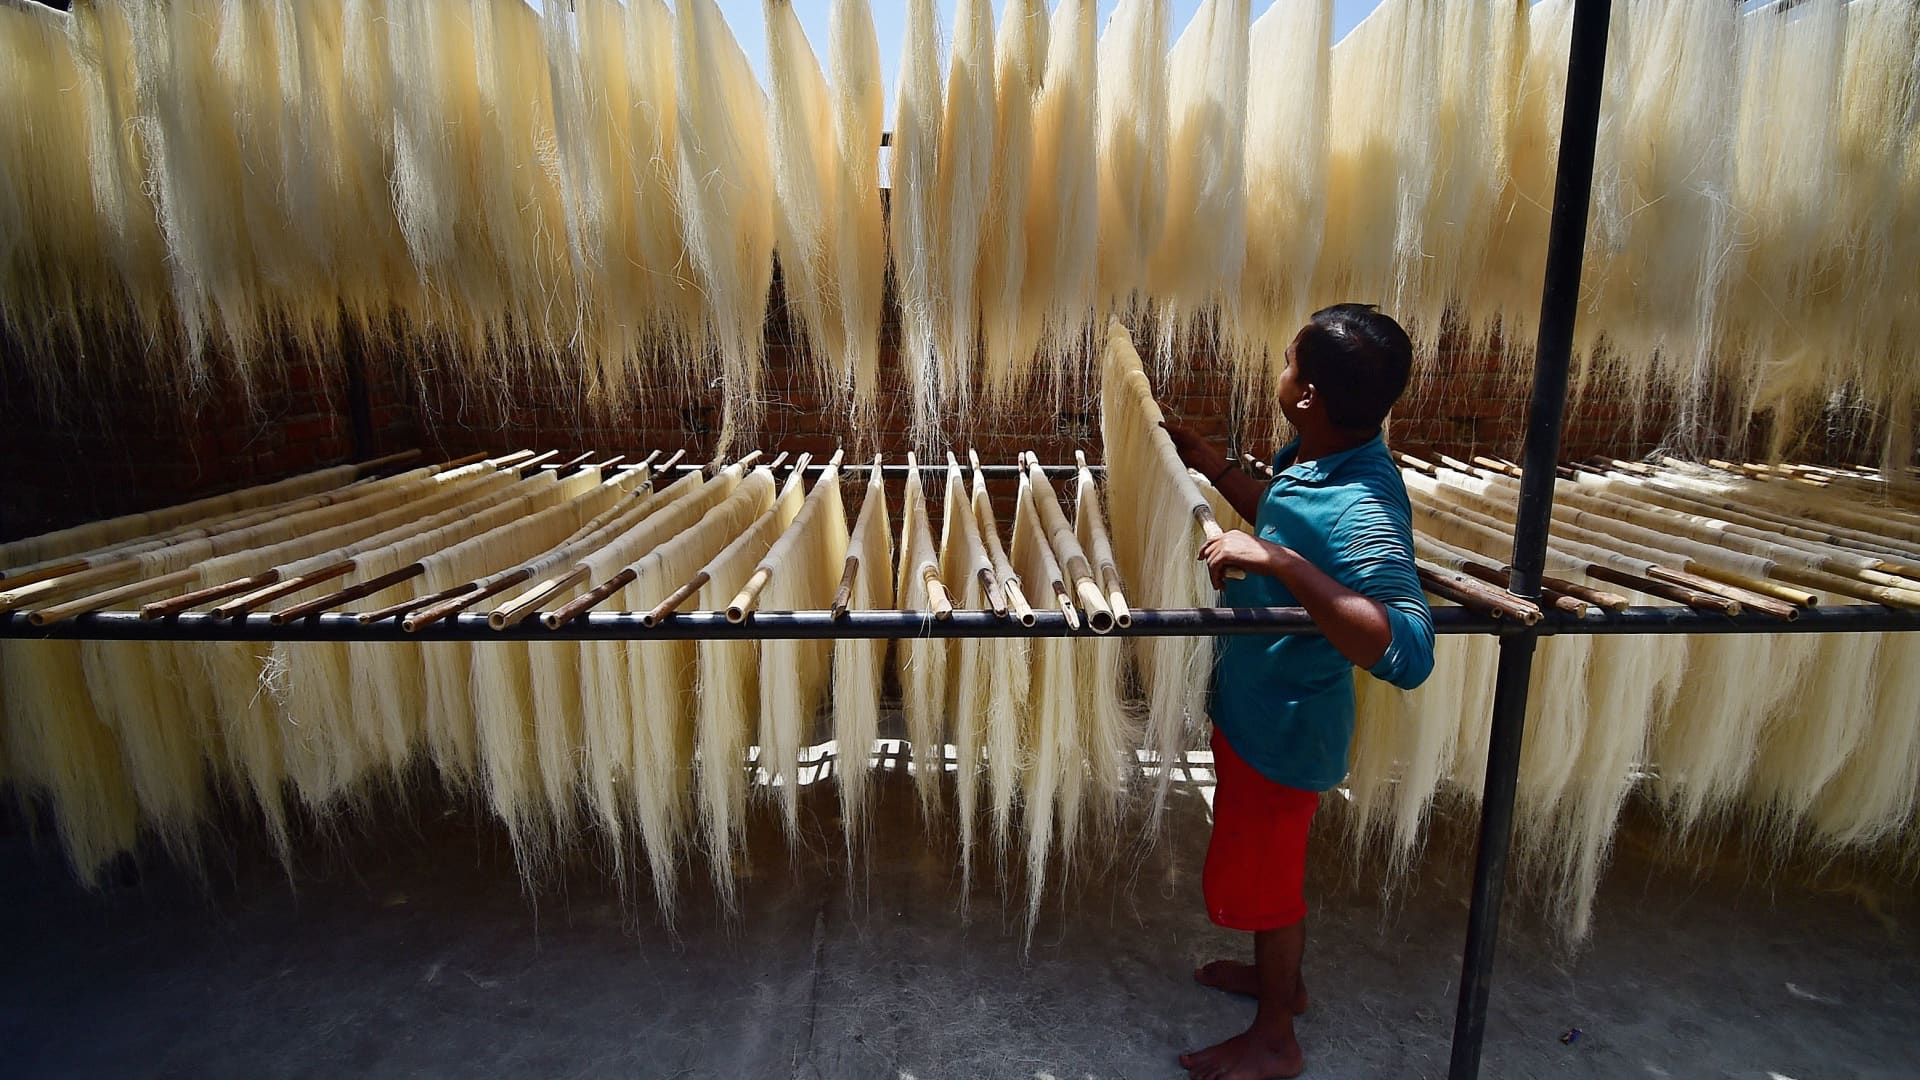 A worker preparing vermicelli, which is used in a traditional sweet dish popularly consumed during the holy month of Ramadan at a factory in Allahabad on April 13, 2021.